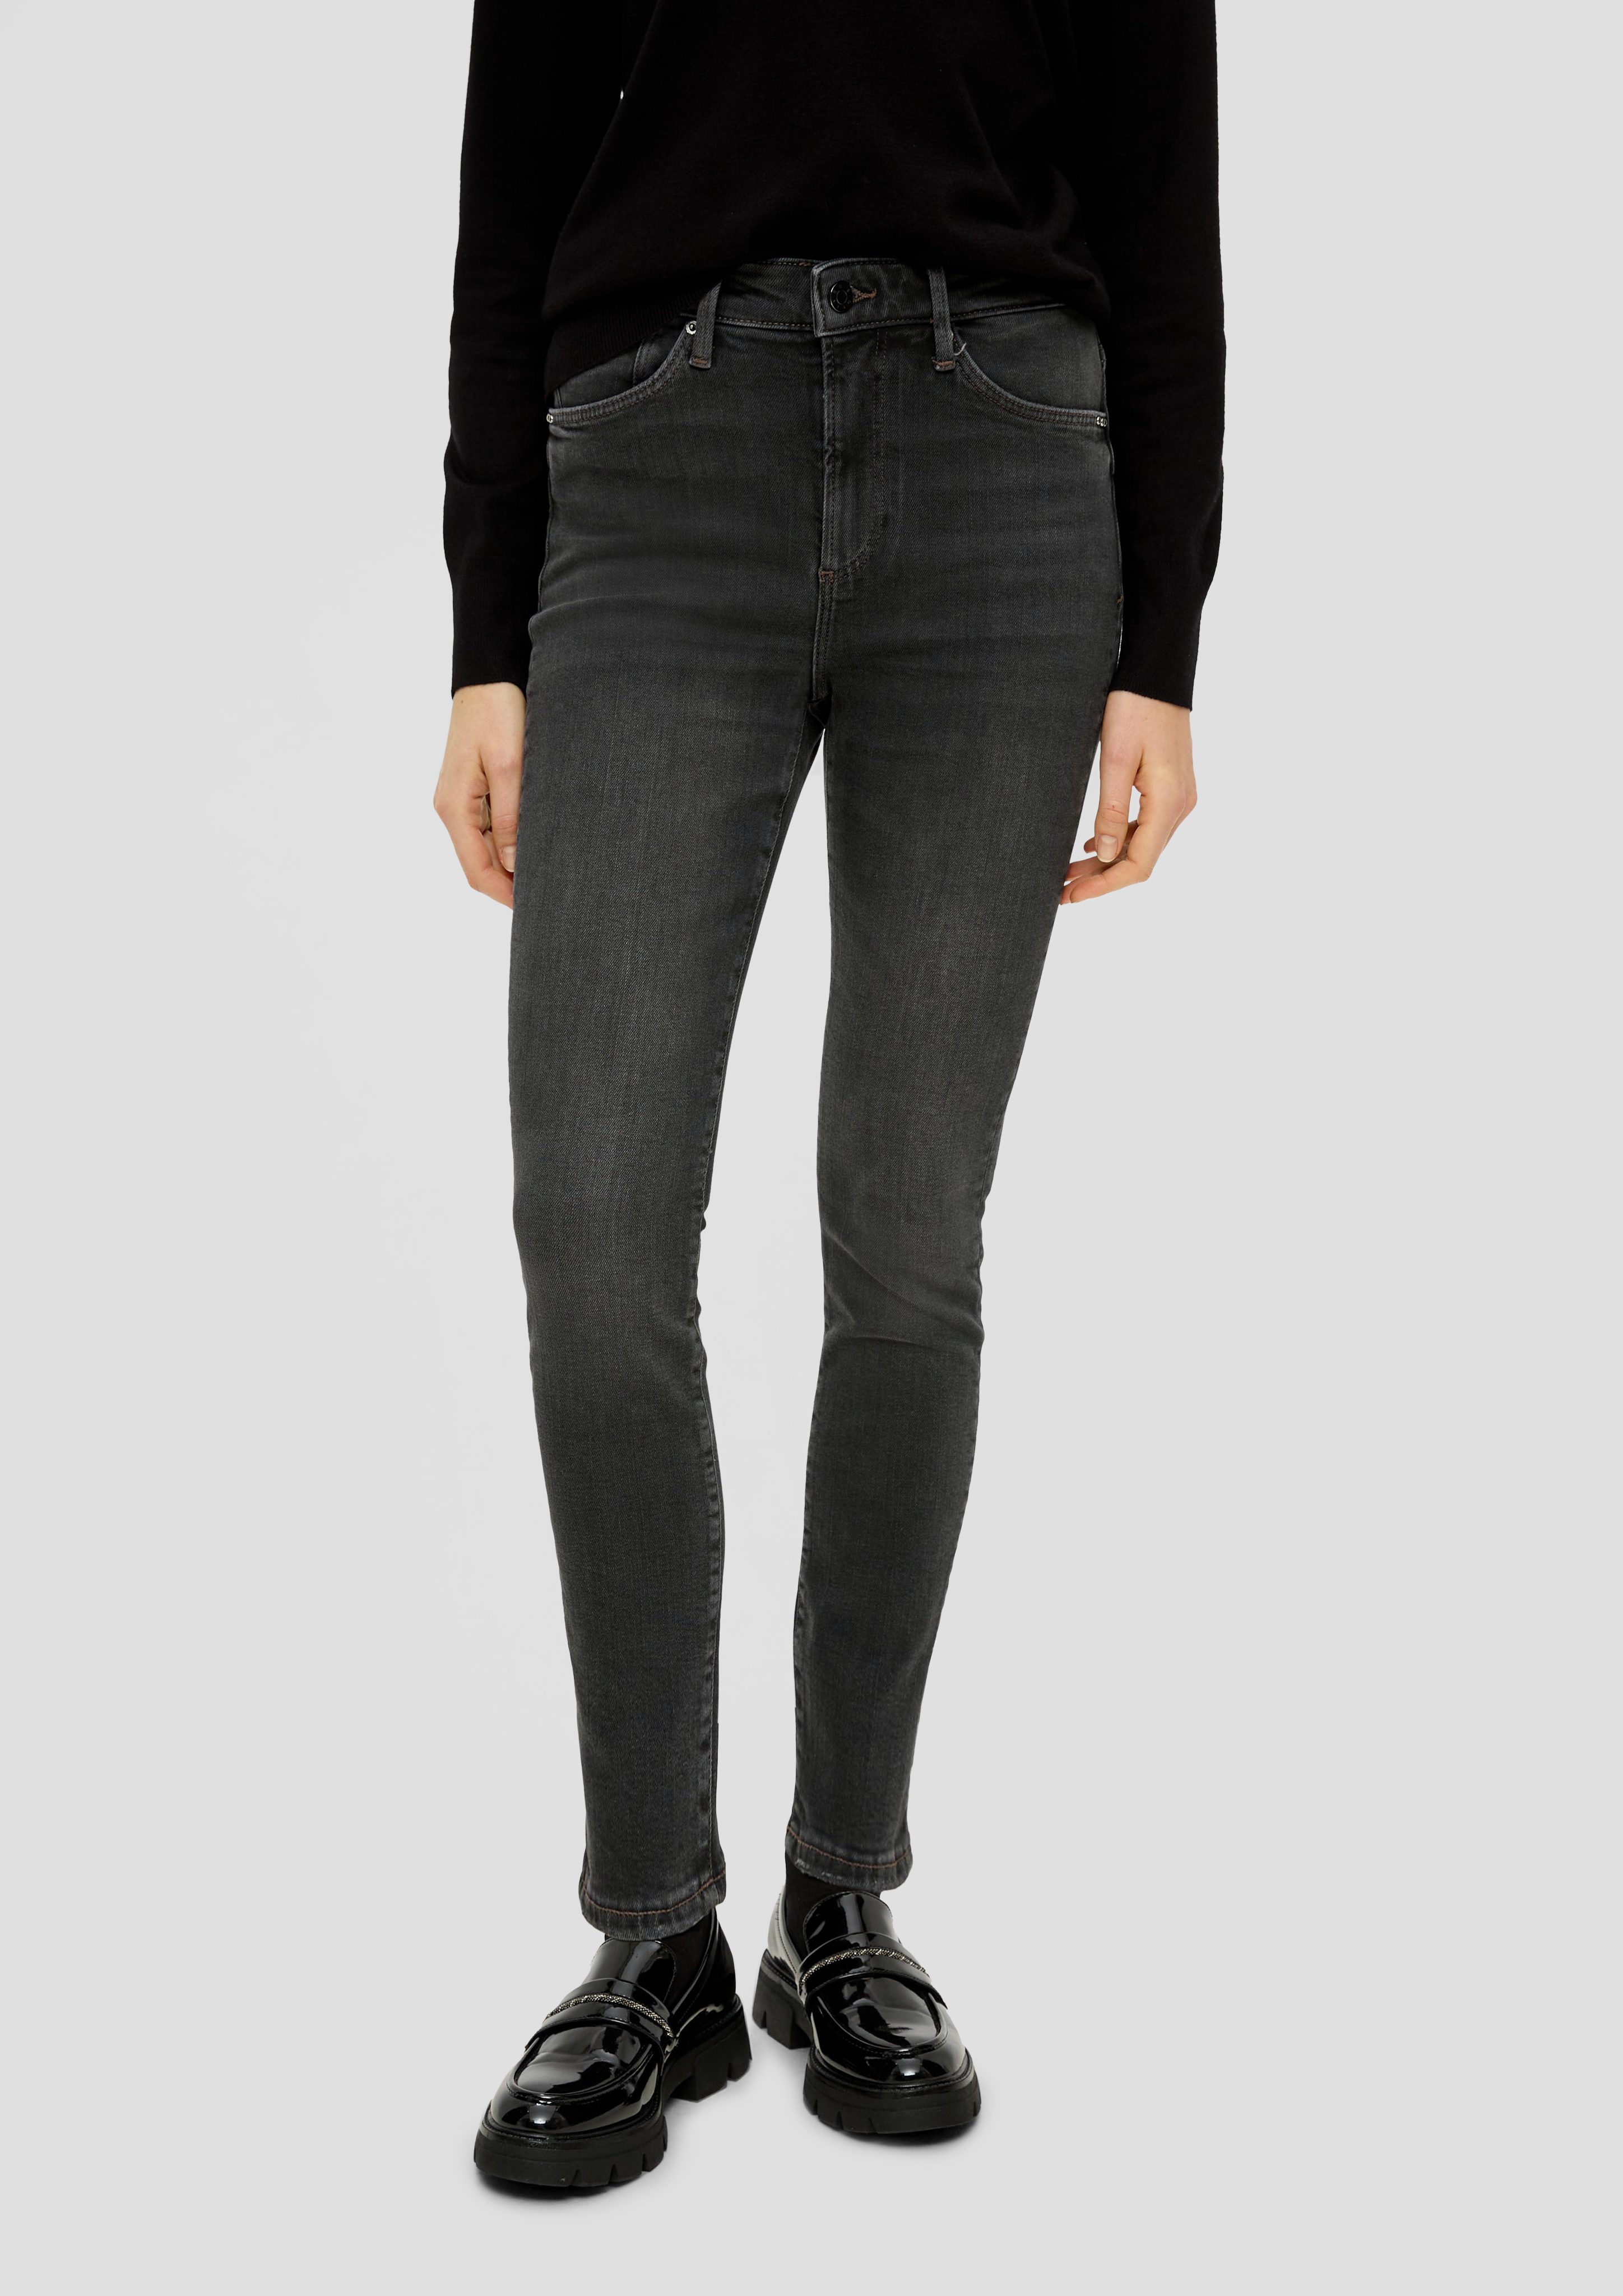 s.Oliver 7/8-Jeans Jeans Izabell / Skinny Fit / High Rise / Skinny Leg Leder-Patch, Nieten, Waschung graphit | 7/8-Jeans